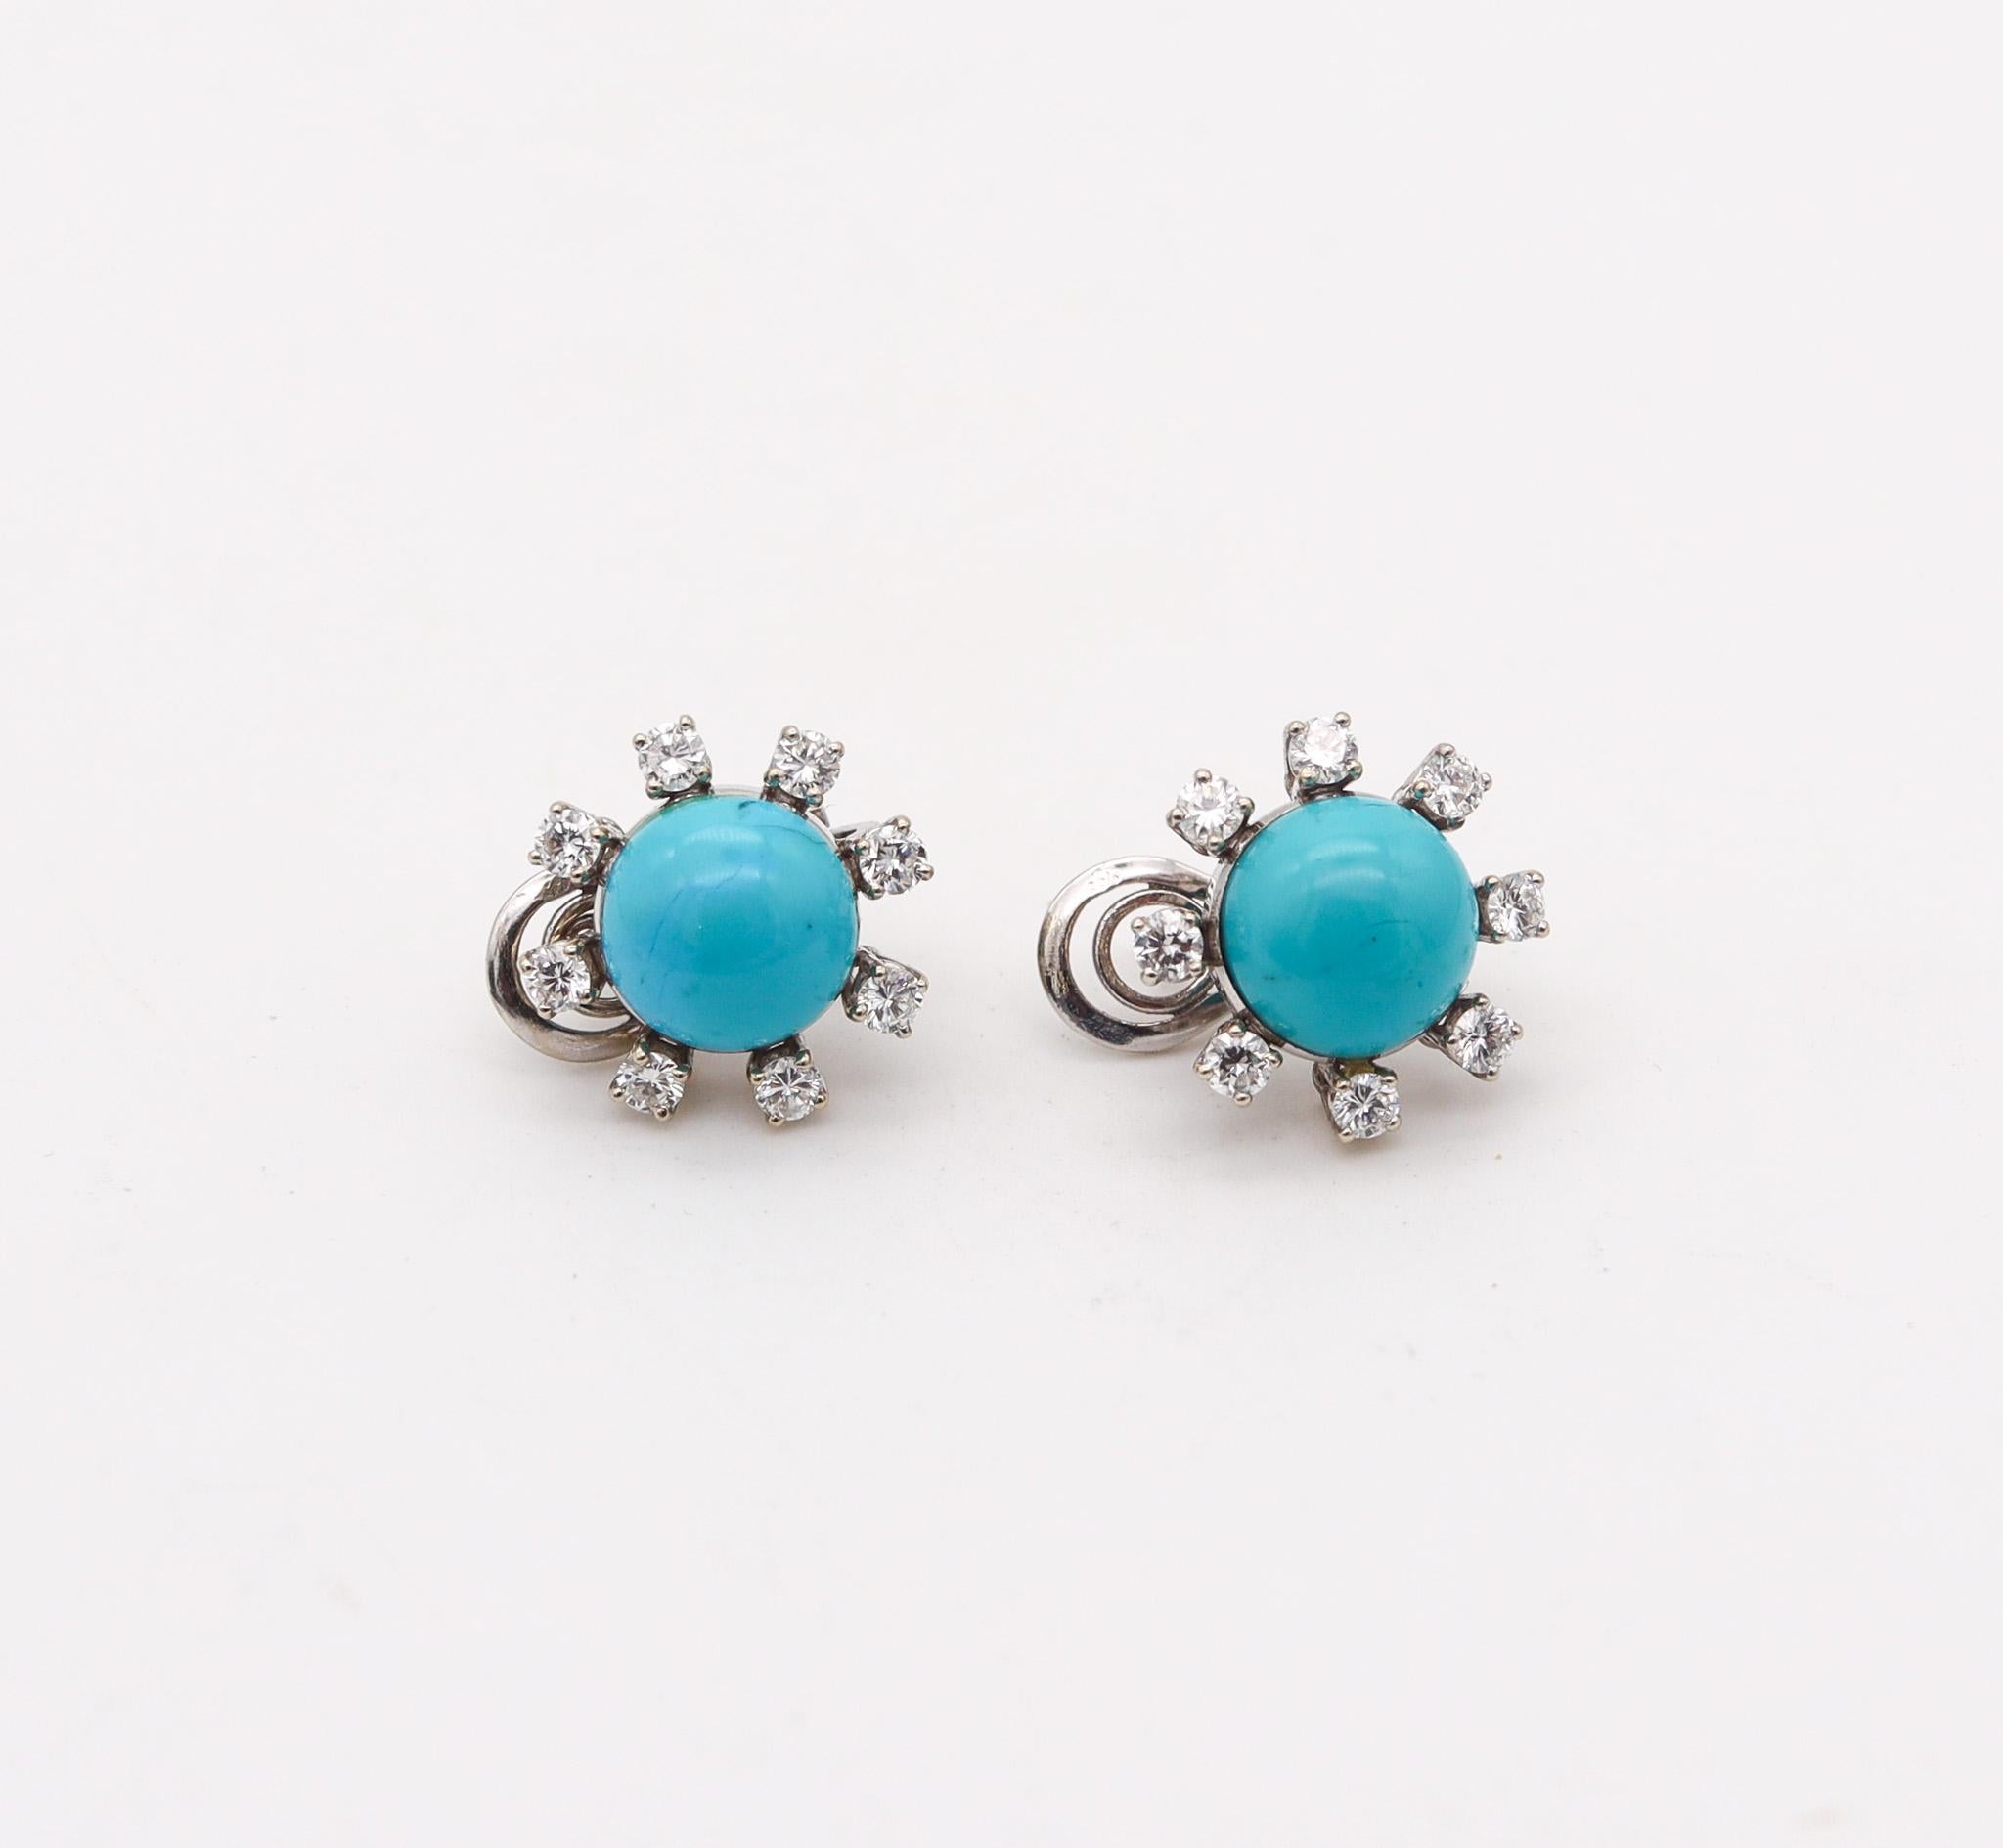 French earrings with turquoises and diamonds.

Colorful and refreshing pair of earrings crafted in Paris France in solid white gold of 18 karats, with polished finish. These earrings has been designed with classic round shapes and are embellished